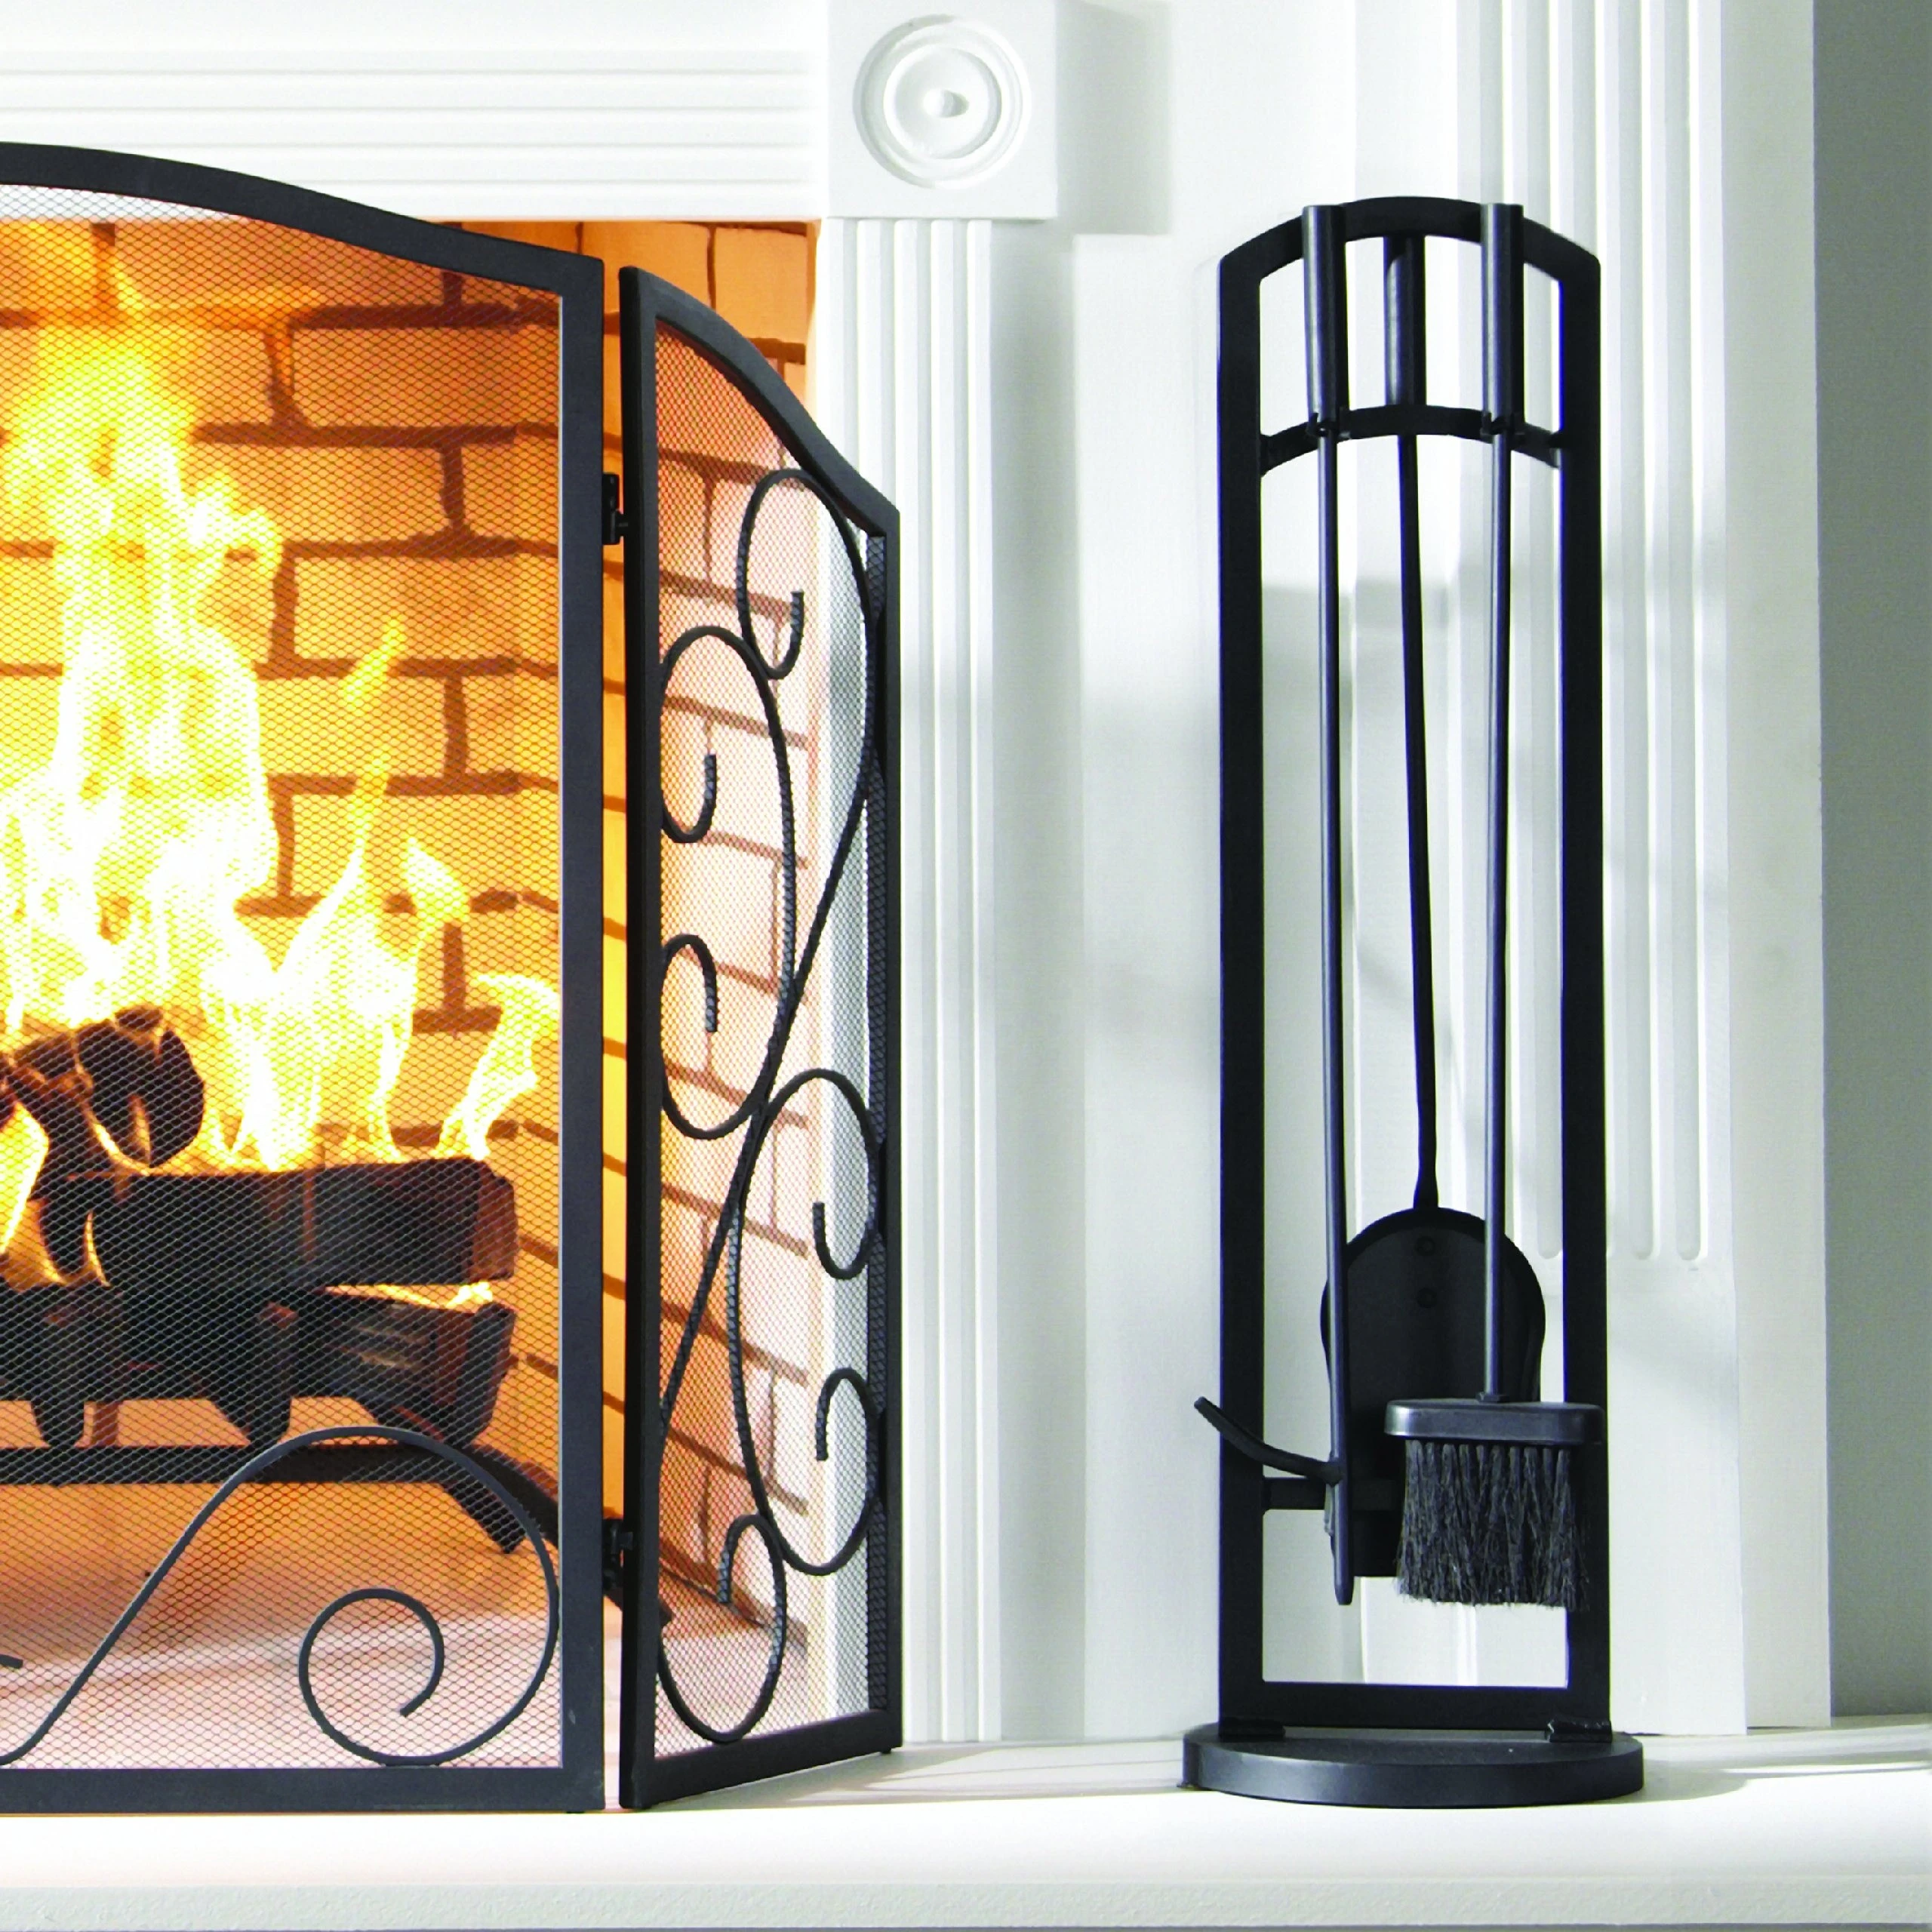 Arched 4 Piece Black Wrought Iron Fire Place Accessories Wood Stove Hearth Tools Holder Fireplace Toolset